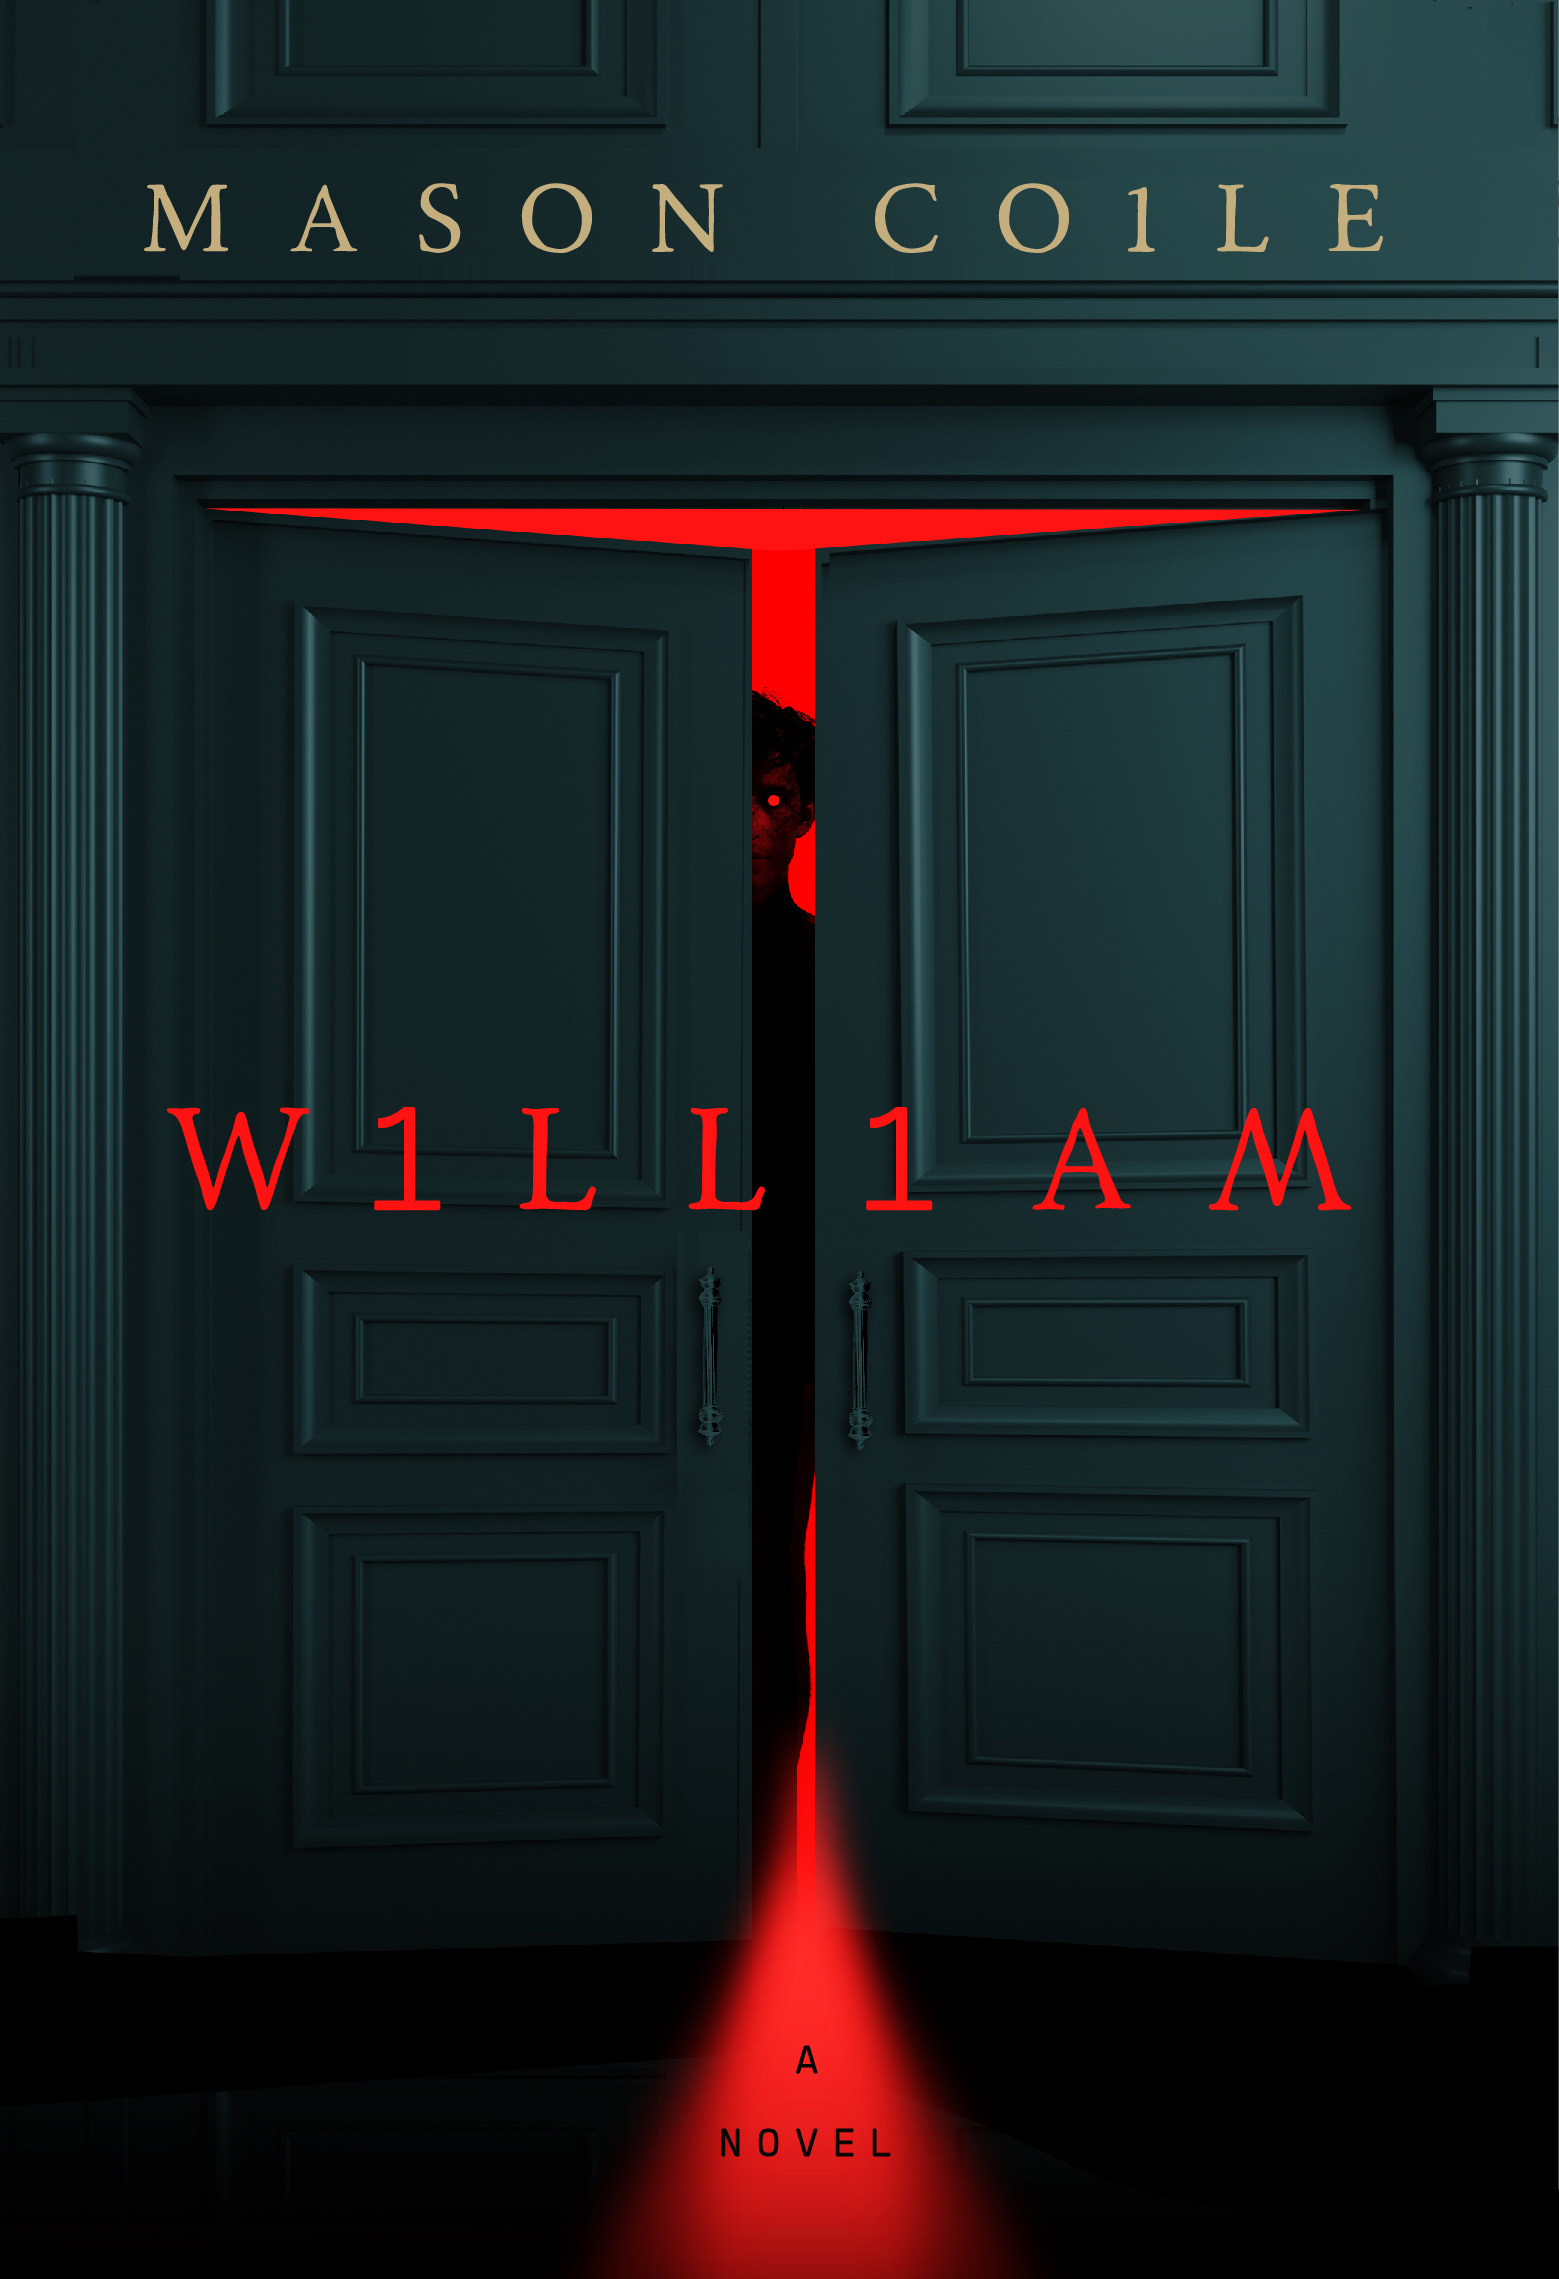 Book cover image for William by Mason Coile - dark grey double doors ajar and a menacing being peeking out from behind the doors, silhouetted against a bright red background.